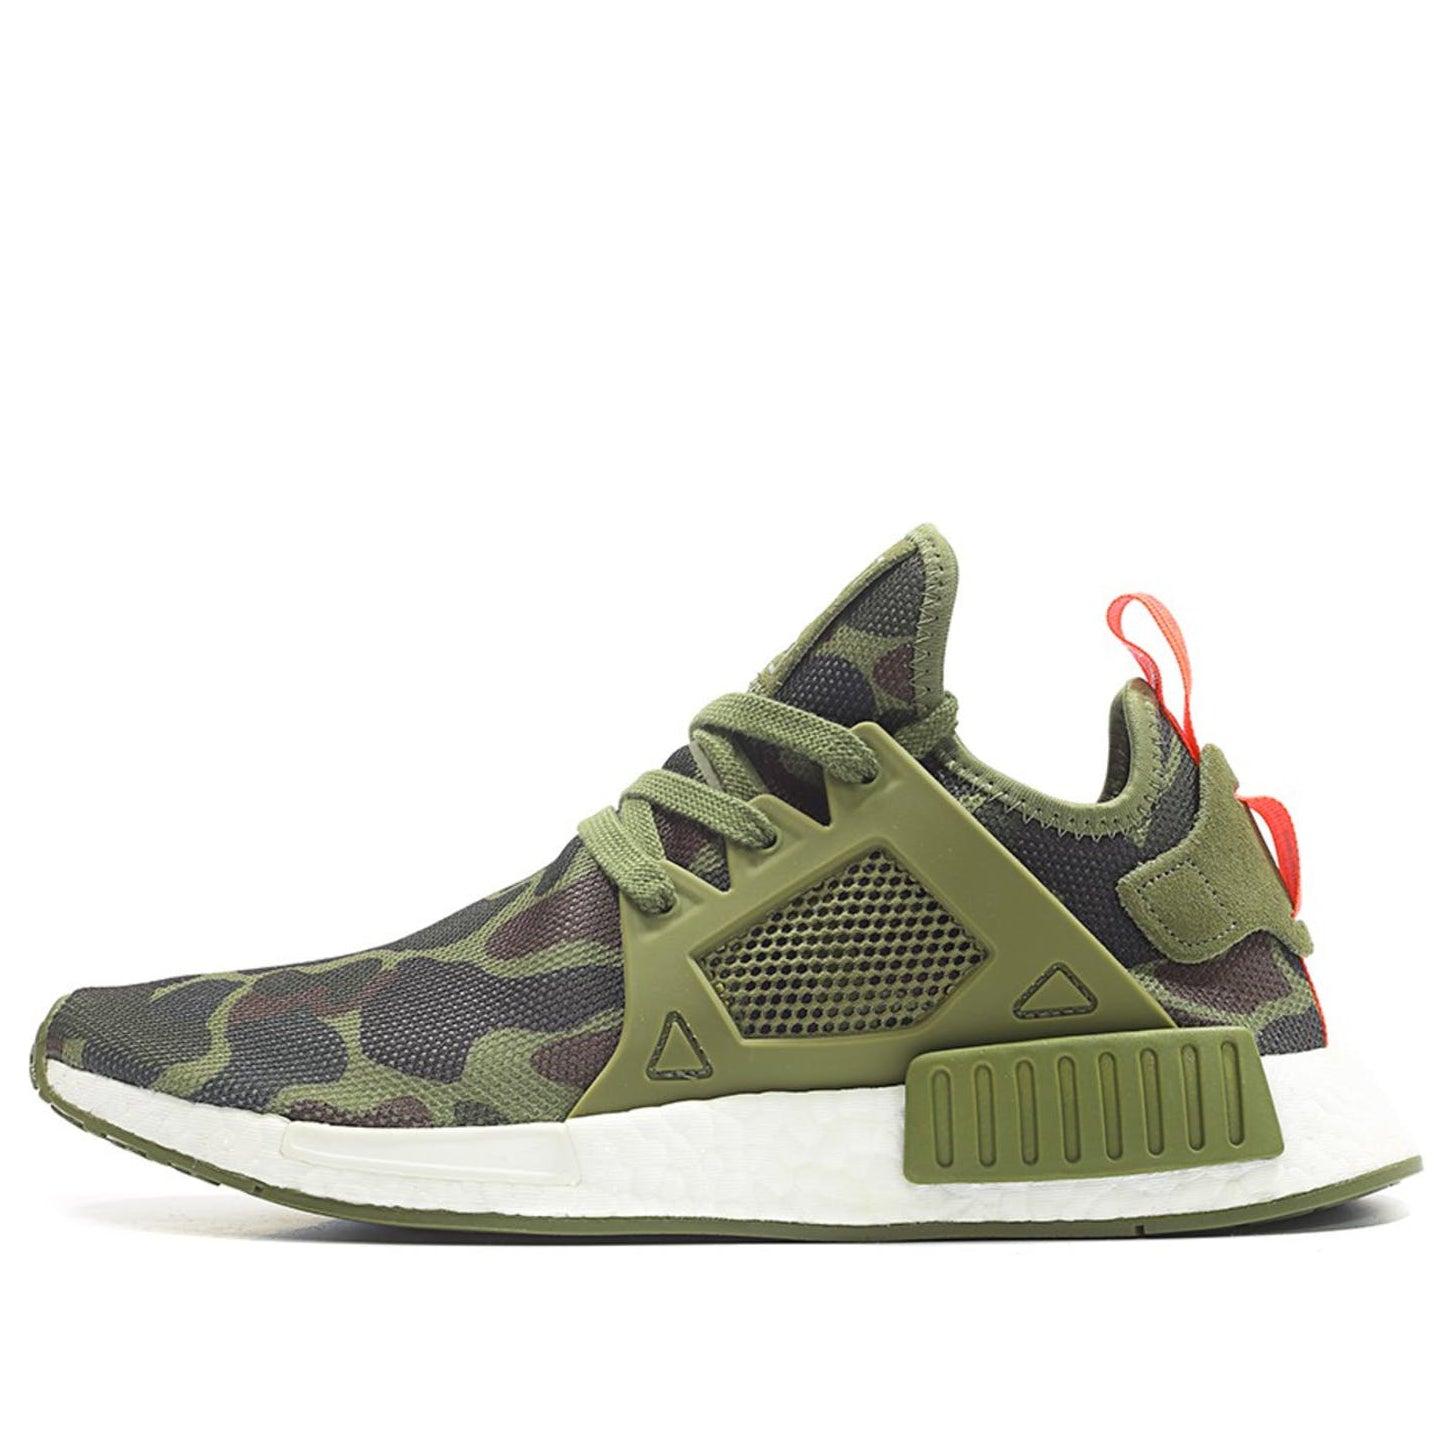 adidas Nmd Xr1 Low Tops Casual Sports Shoe Green Camouflage for Men | Lyst